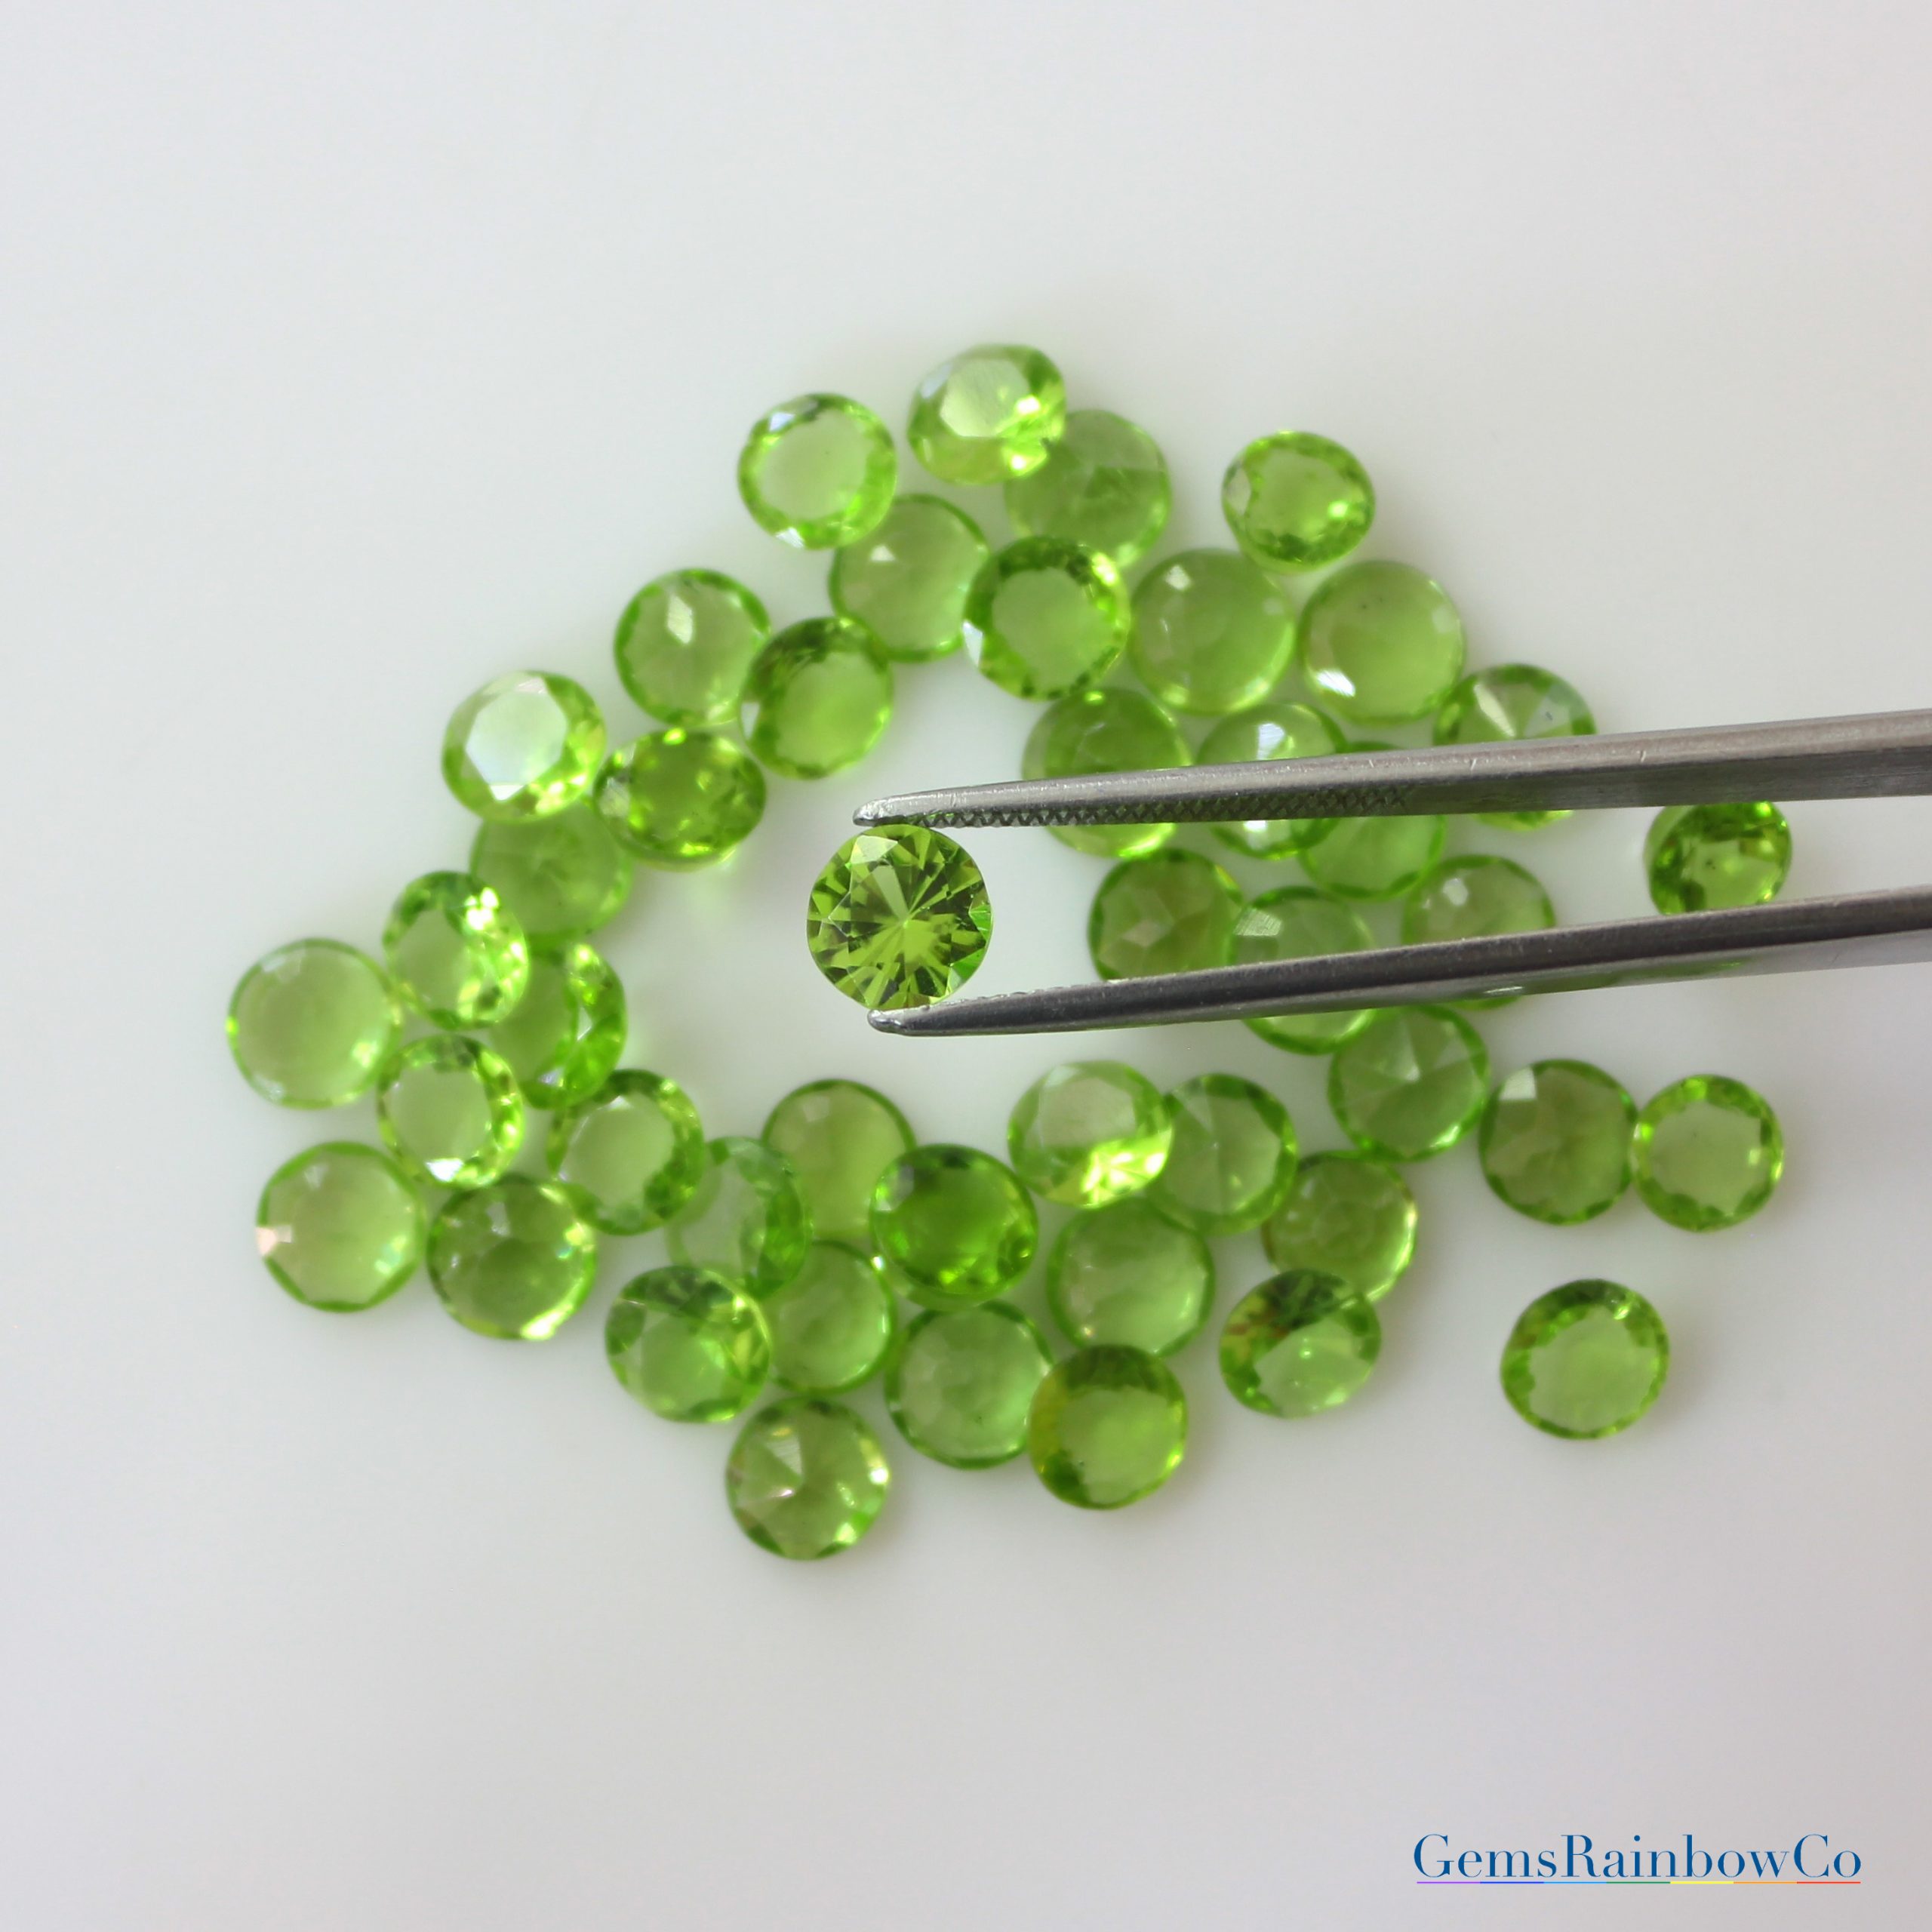 Details about   Natural Peridot Gemstone Round Shape Loose Green Peridot 4mm Faceted Lot C4296